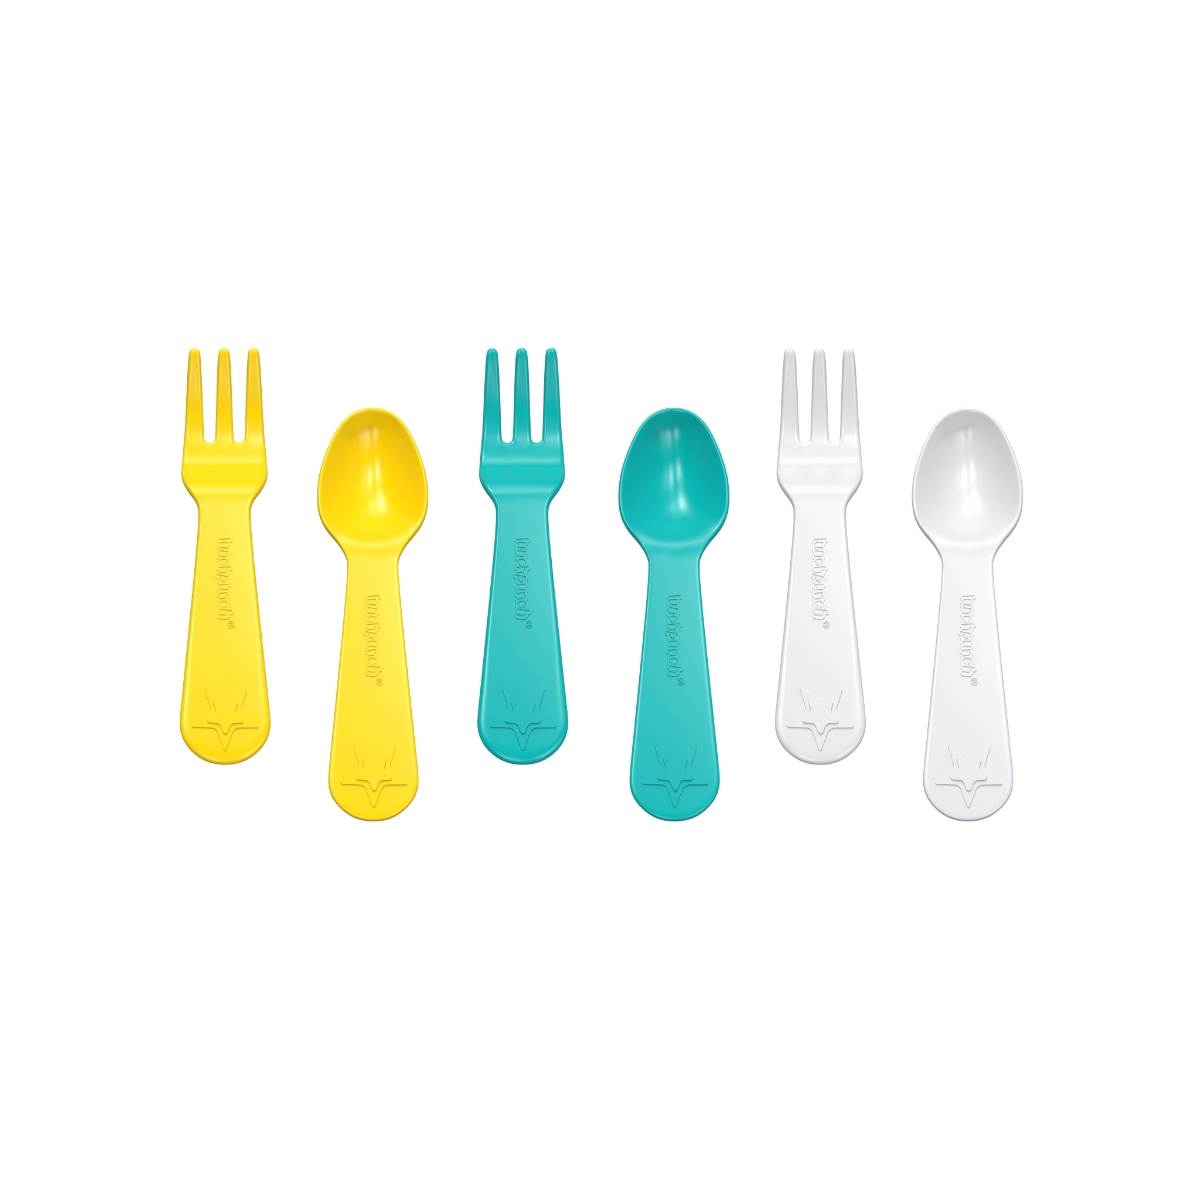 LUNCH PUNCH FORK AND SPOON SET - YELLOW